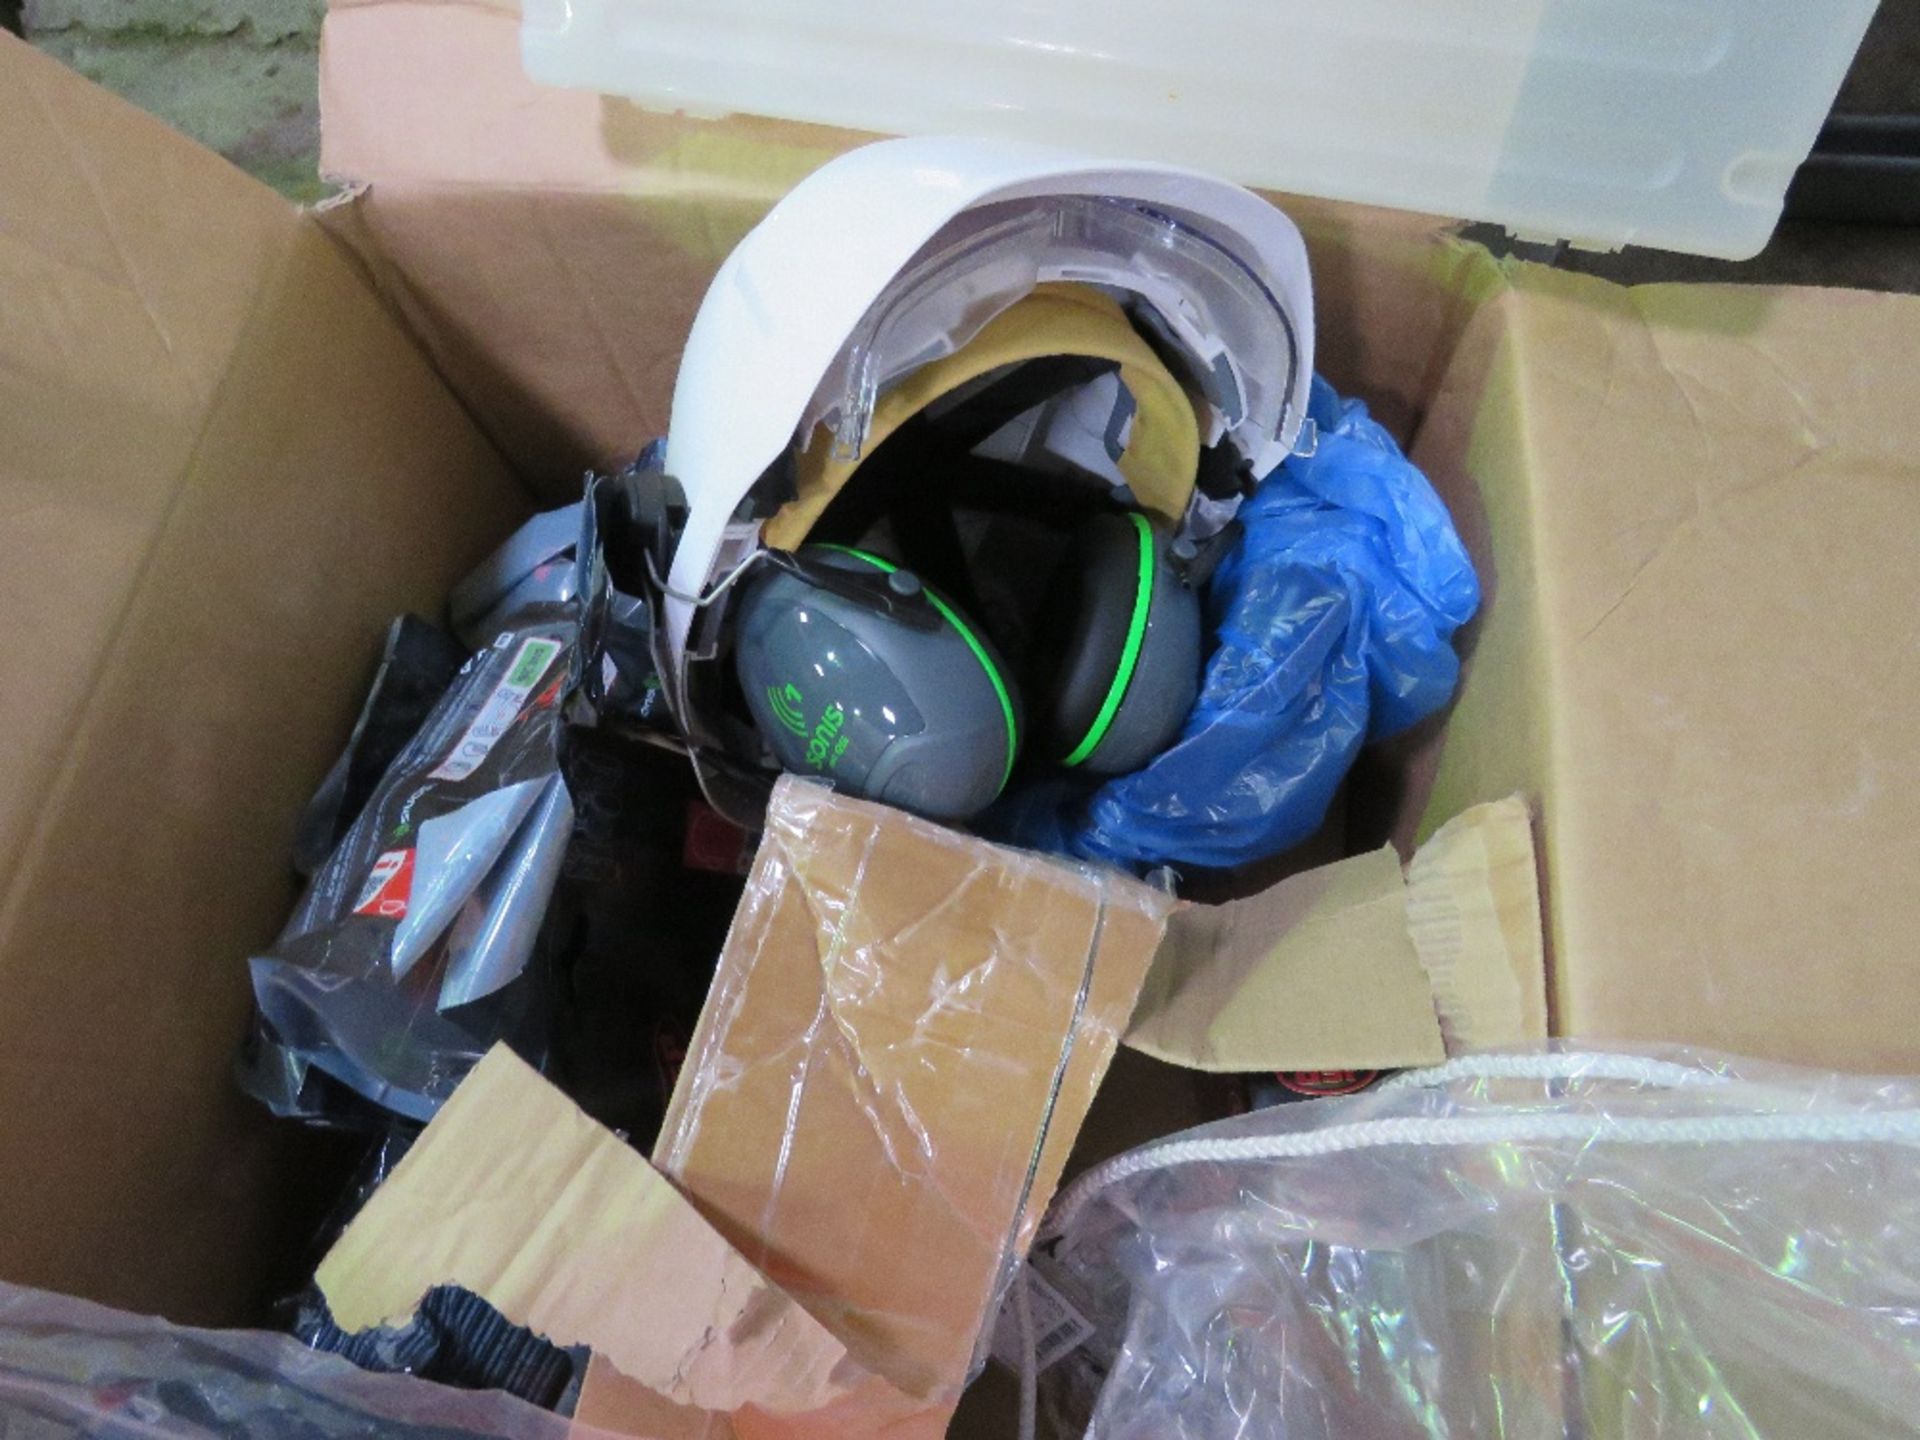 BOX OF ASSORTED SAFETY CLOTHING INCLUDING MASKS, HELMETS, EARMUFFS FOR HELMETS, TROUSERS, SHIRTS ETC - Image 3 of 4